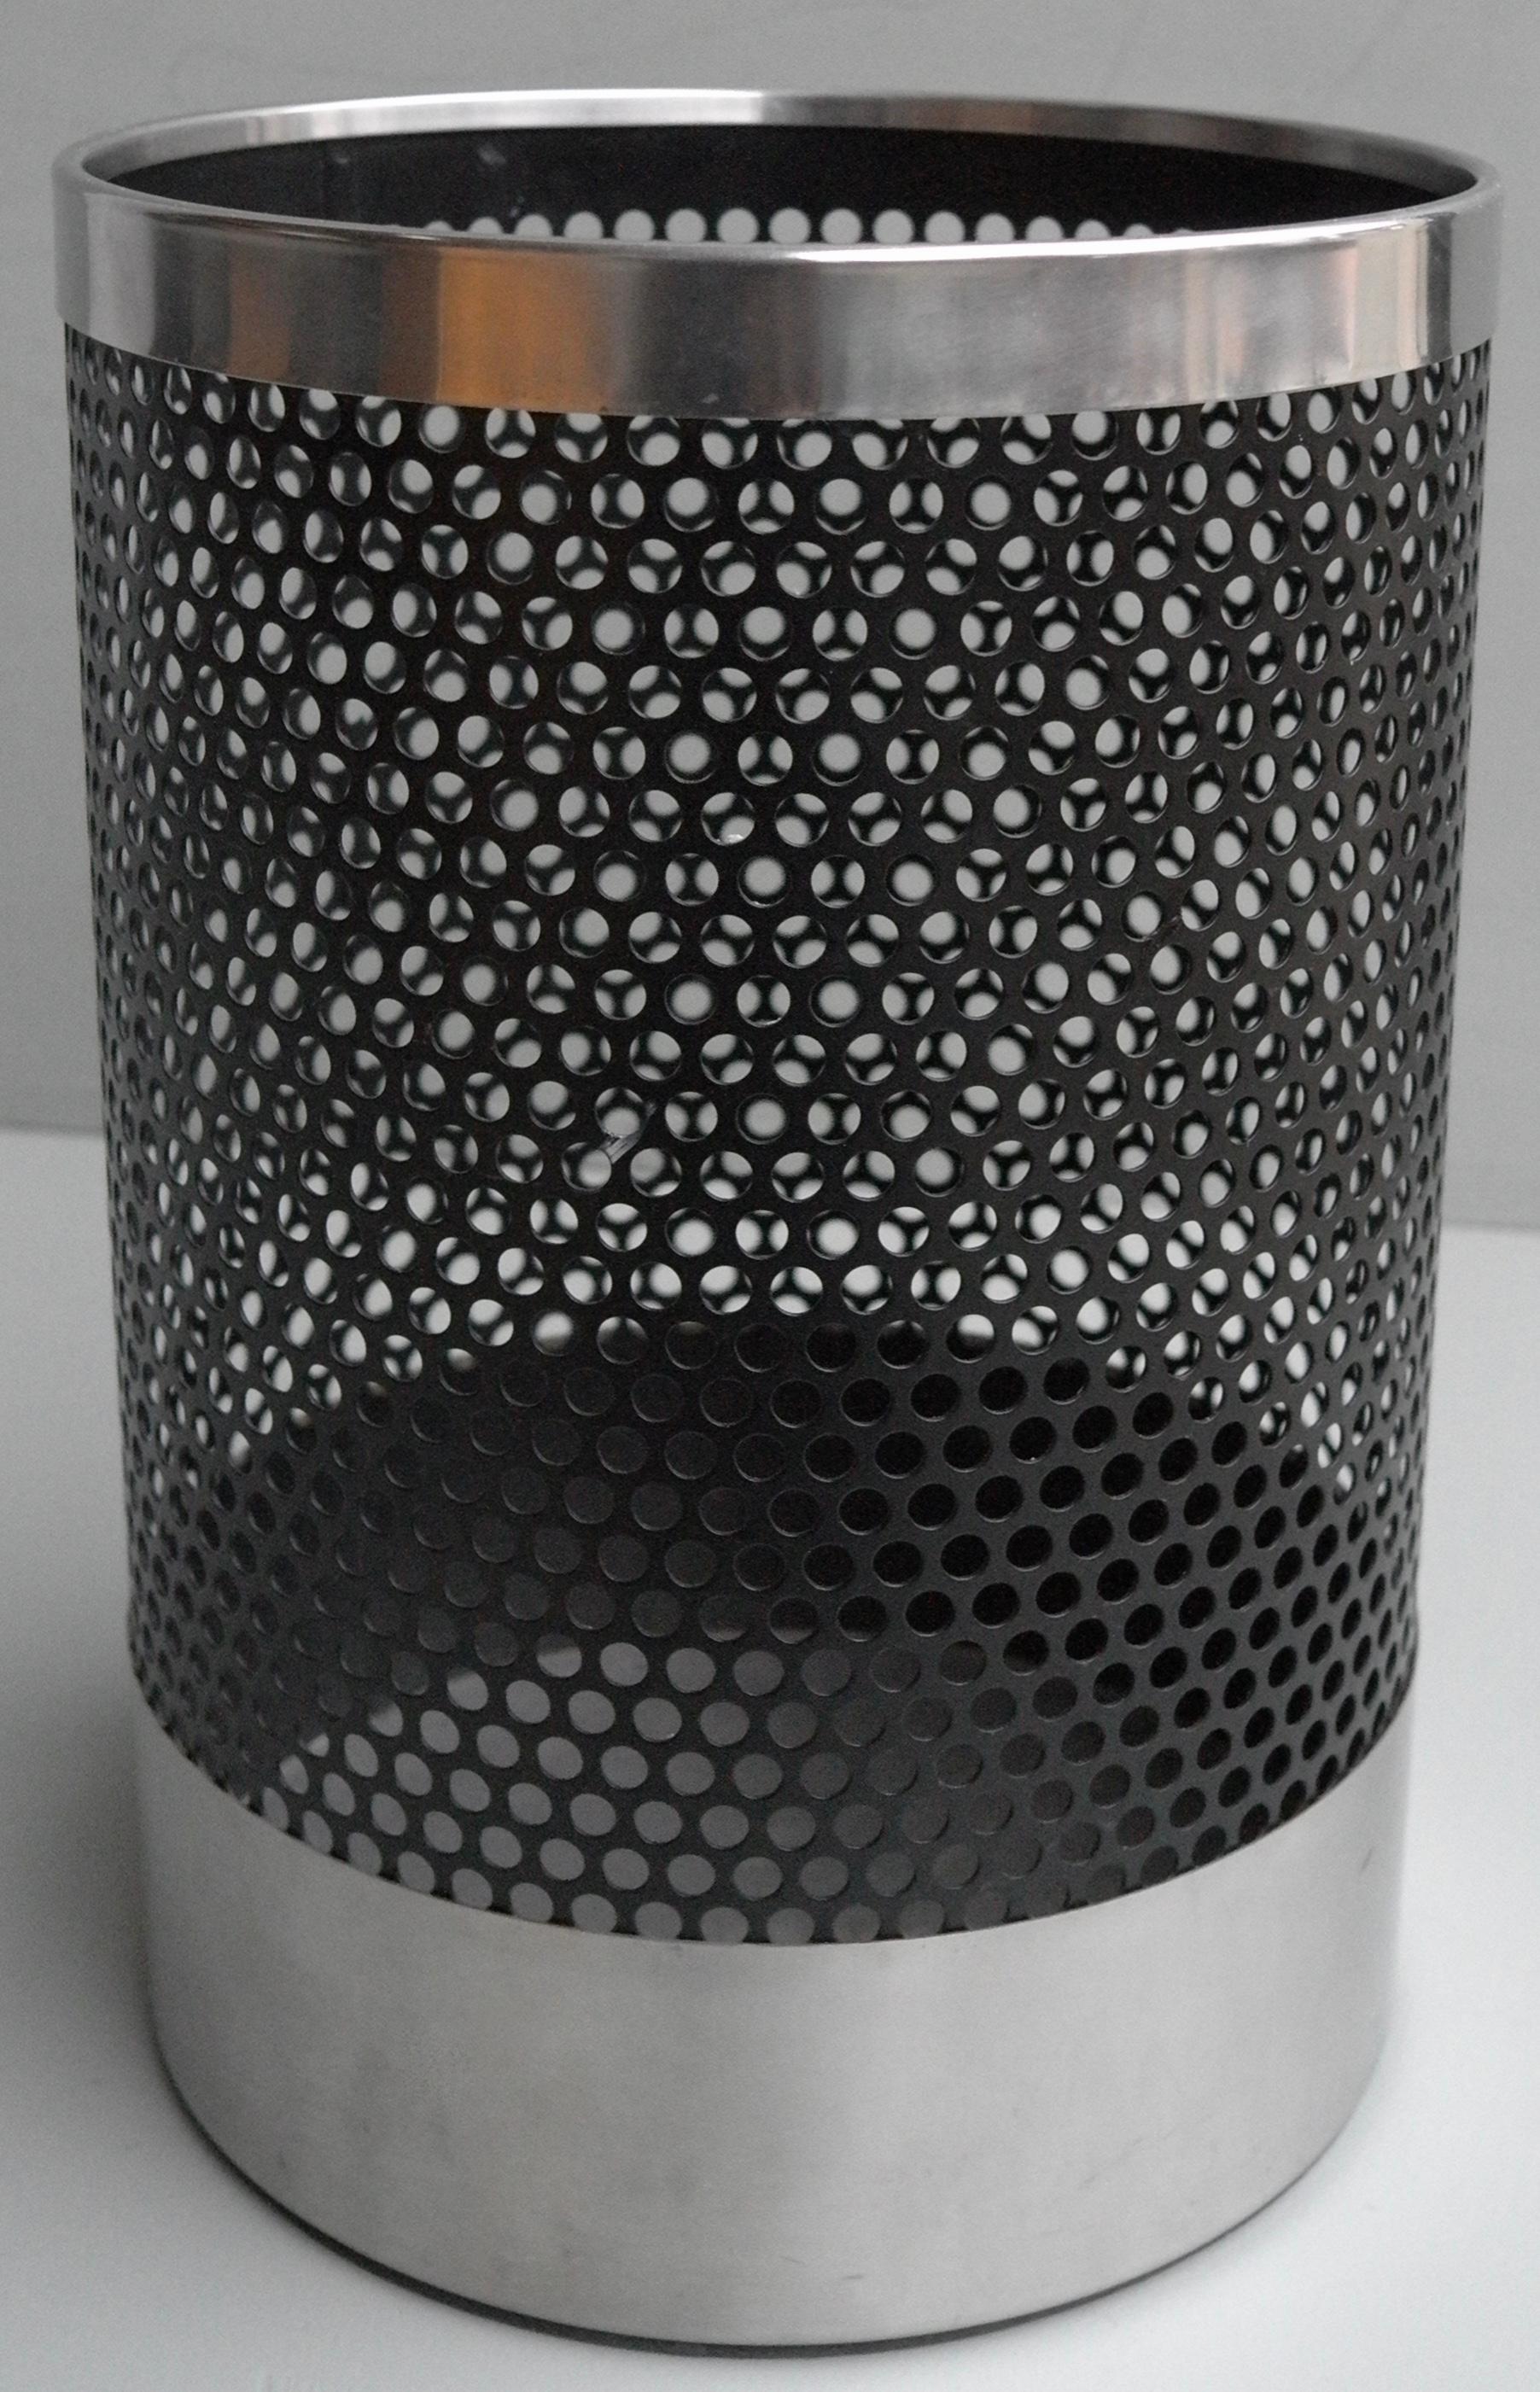 Trash Can by Velca Legnano, Milano, Italy, 1970s. Metal and stainless steel.